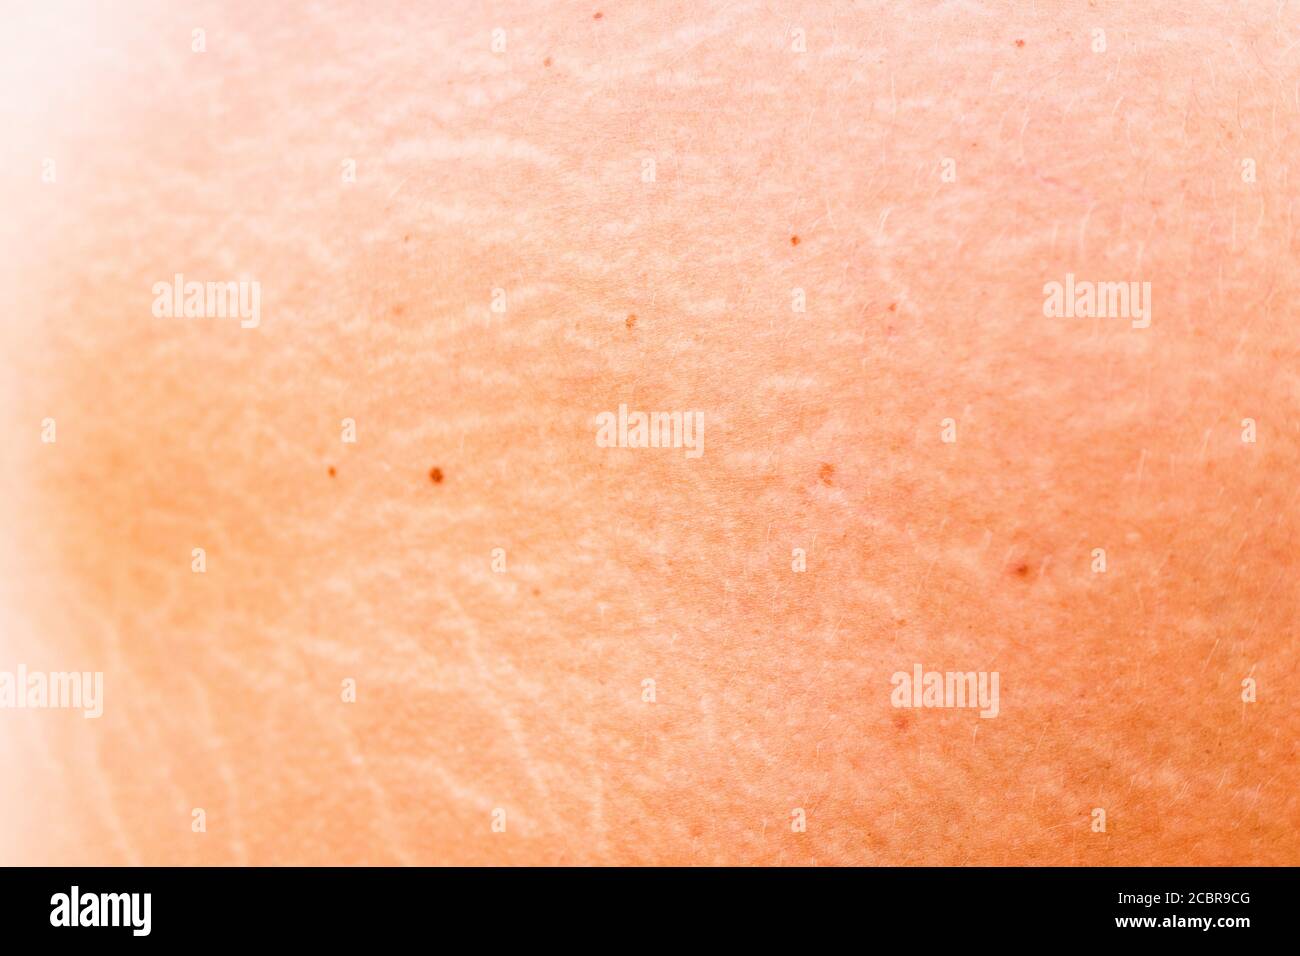 Stretch marks on the skin of a middle-aged woman, detail. Stock Photo